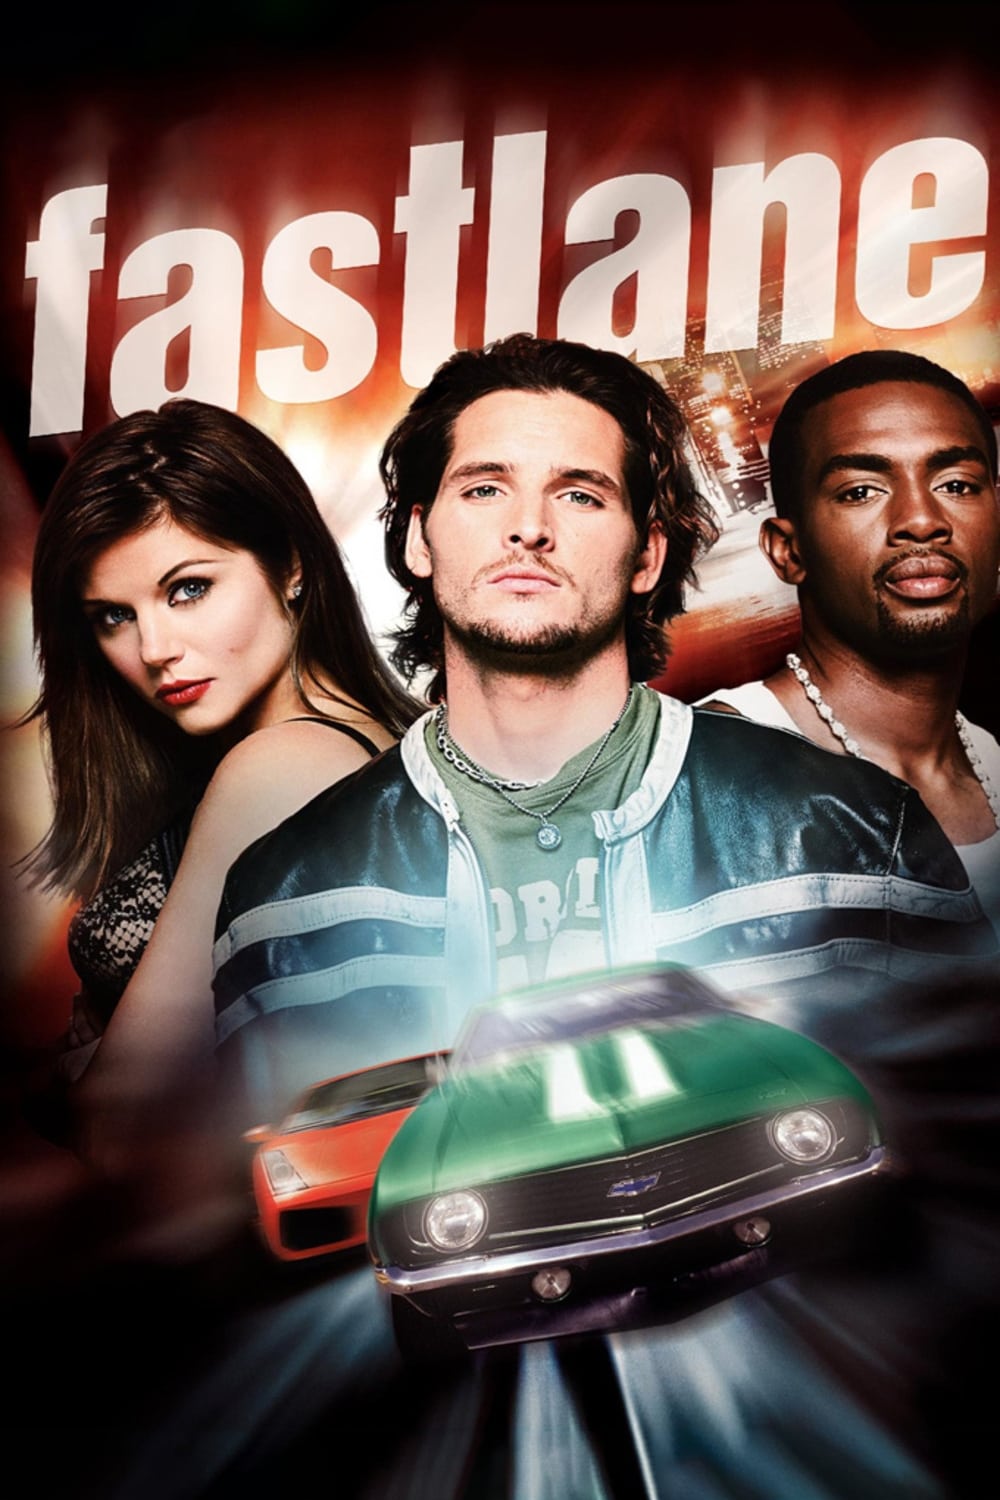 Fastlane TV Shows About Police Department